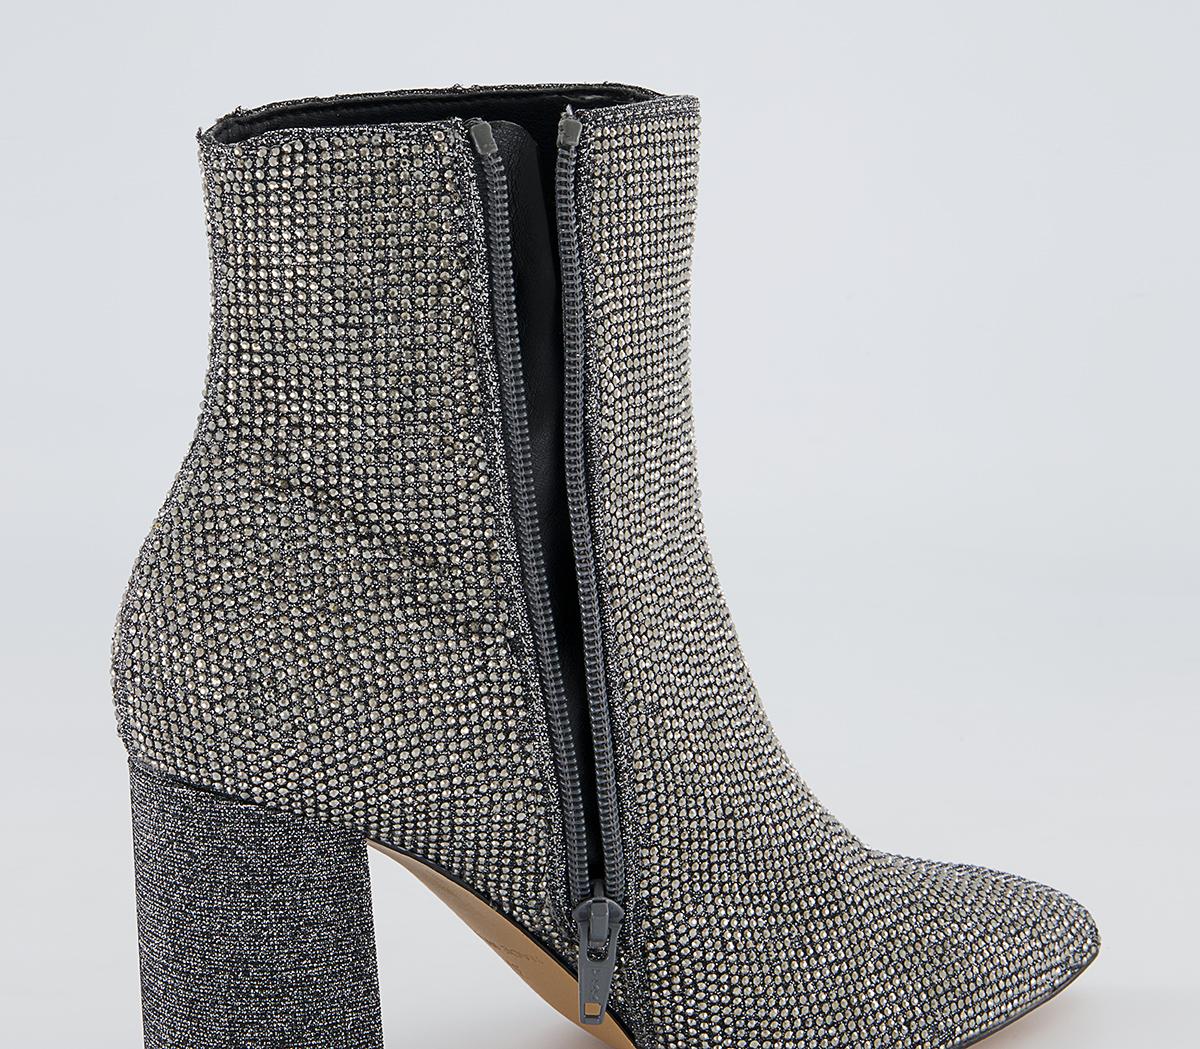 OFFICE Alessa Embellished Block Heel Ankle Boots Pewter - Women's Ankle ...